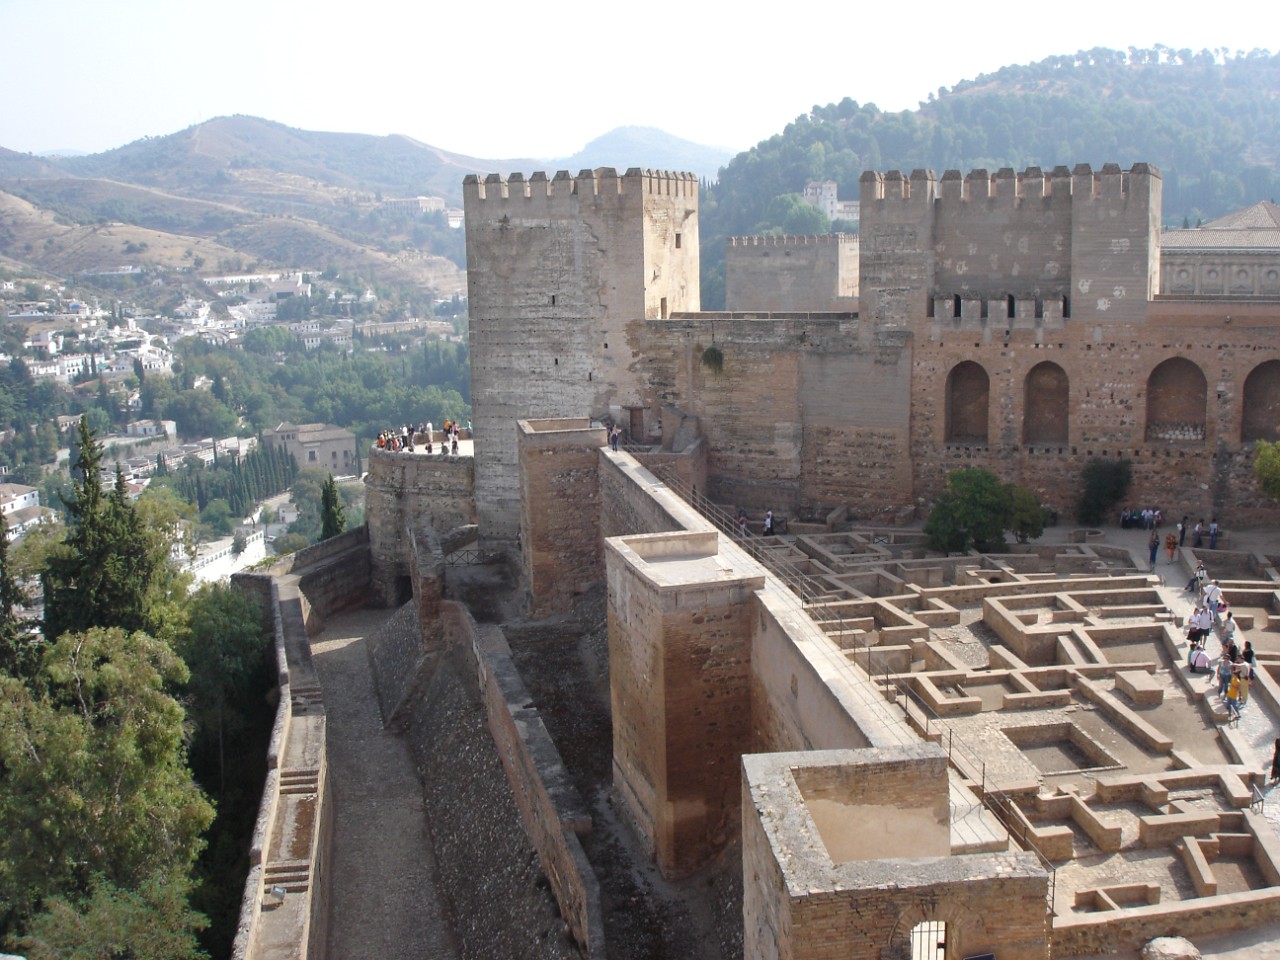 Alcazaba, the oldest part of Alhambra complex